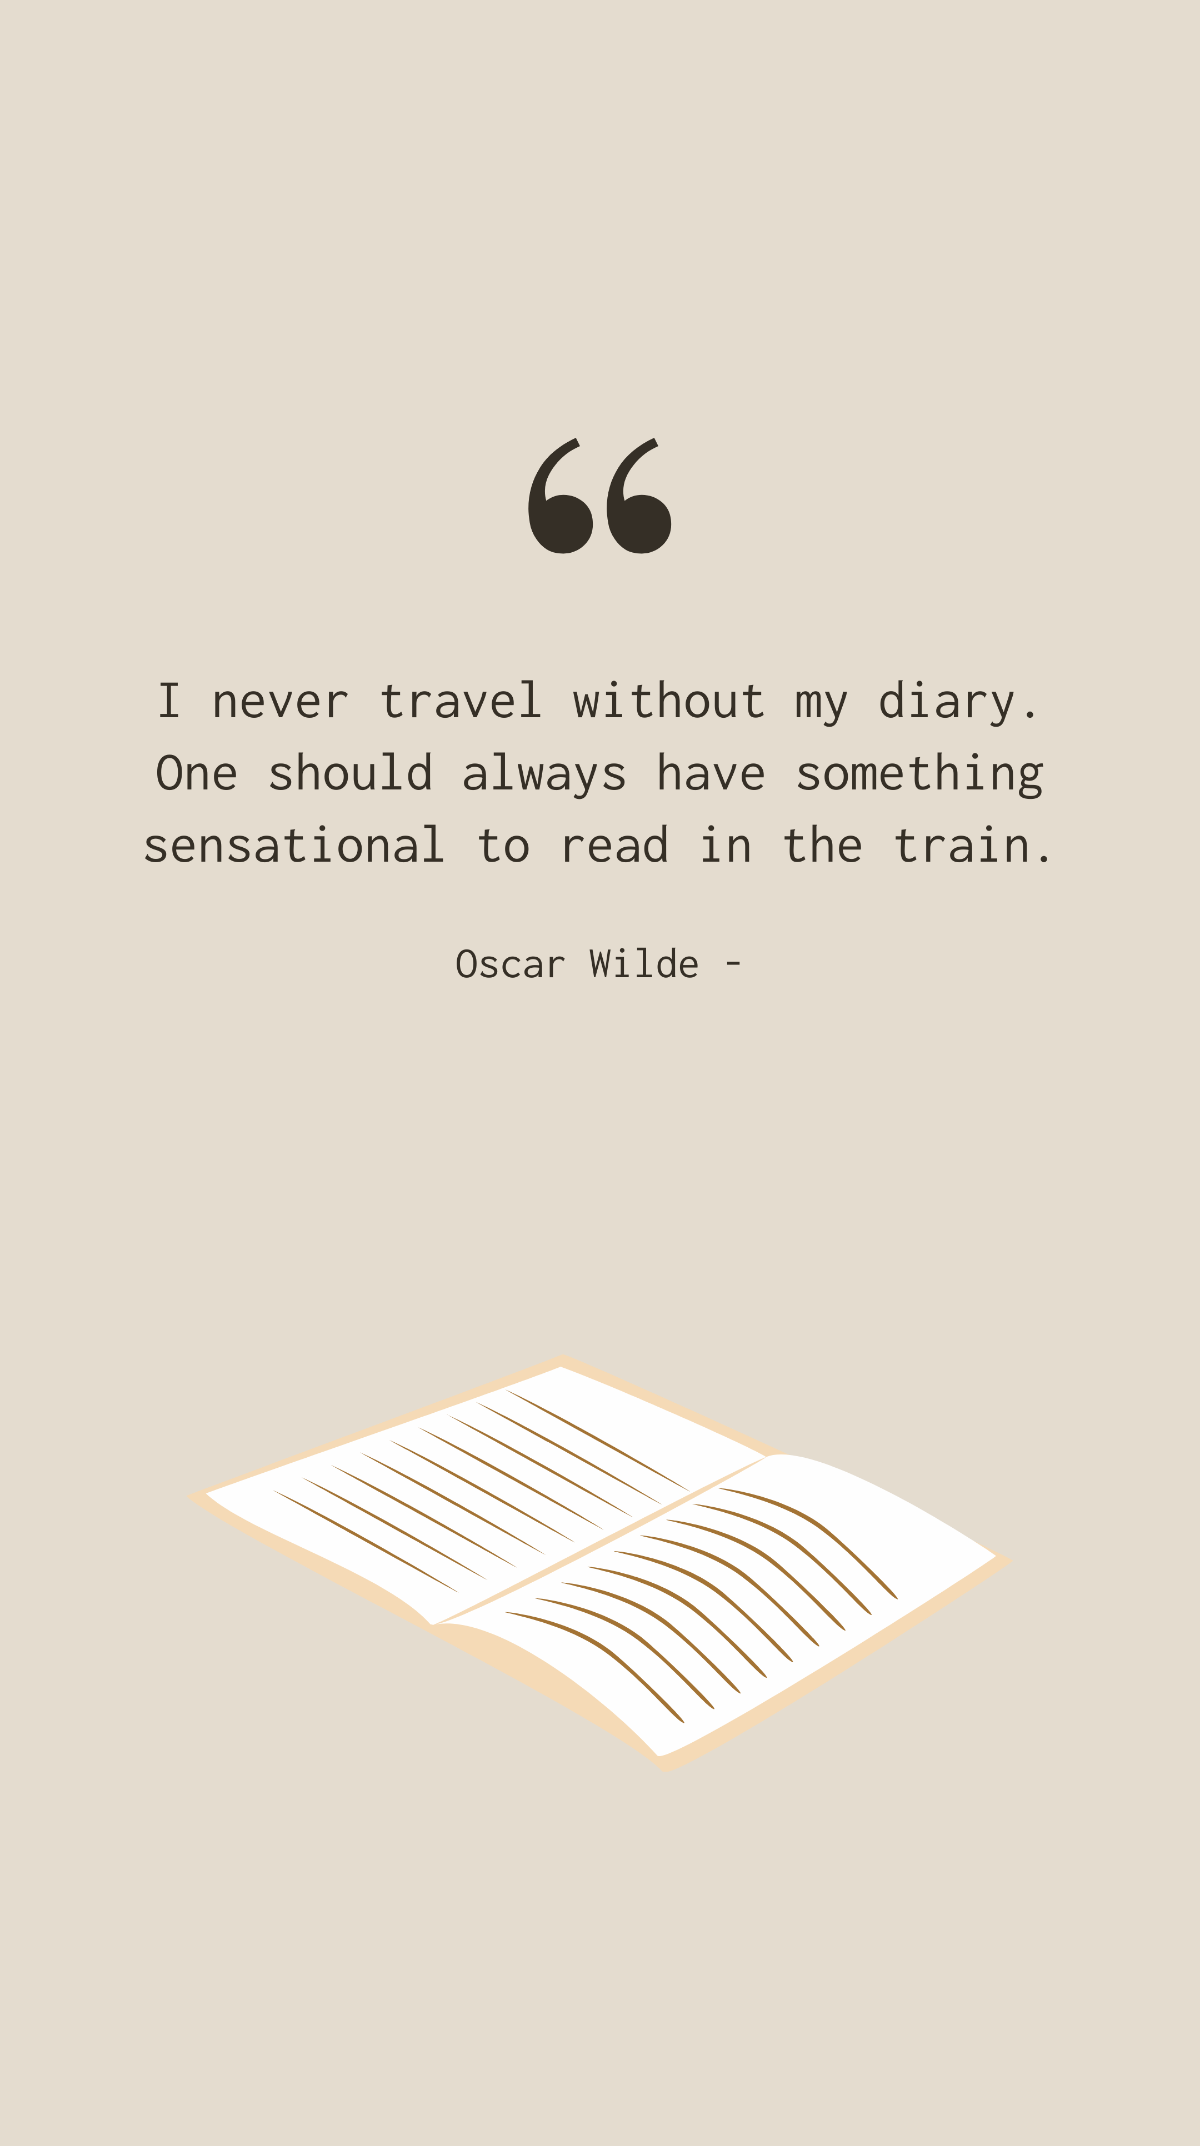 Free Oscar Wilde - I never travel without my diary. One should always have something sensational to read in the train. Template